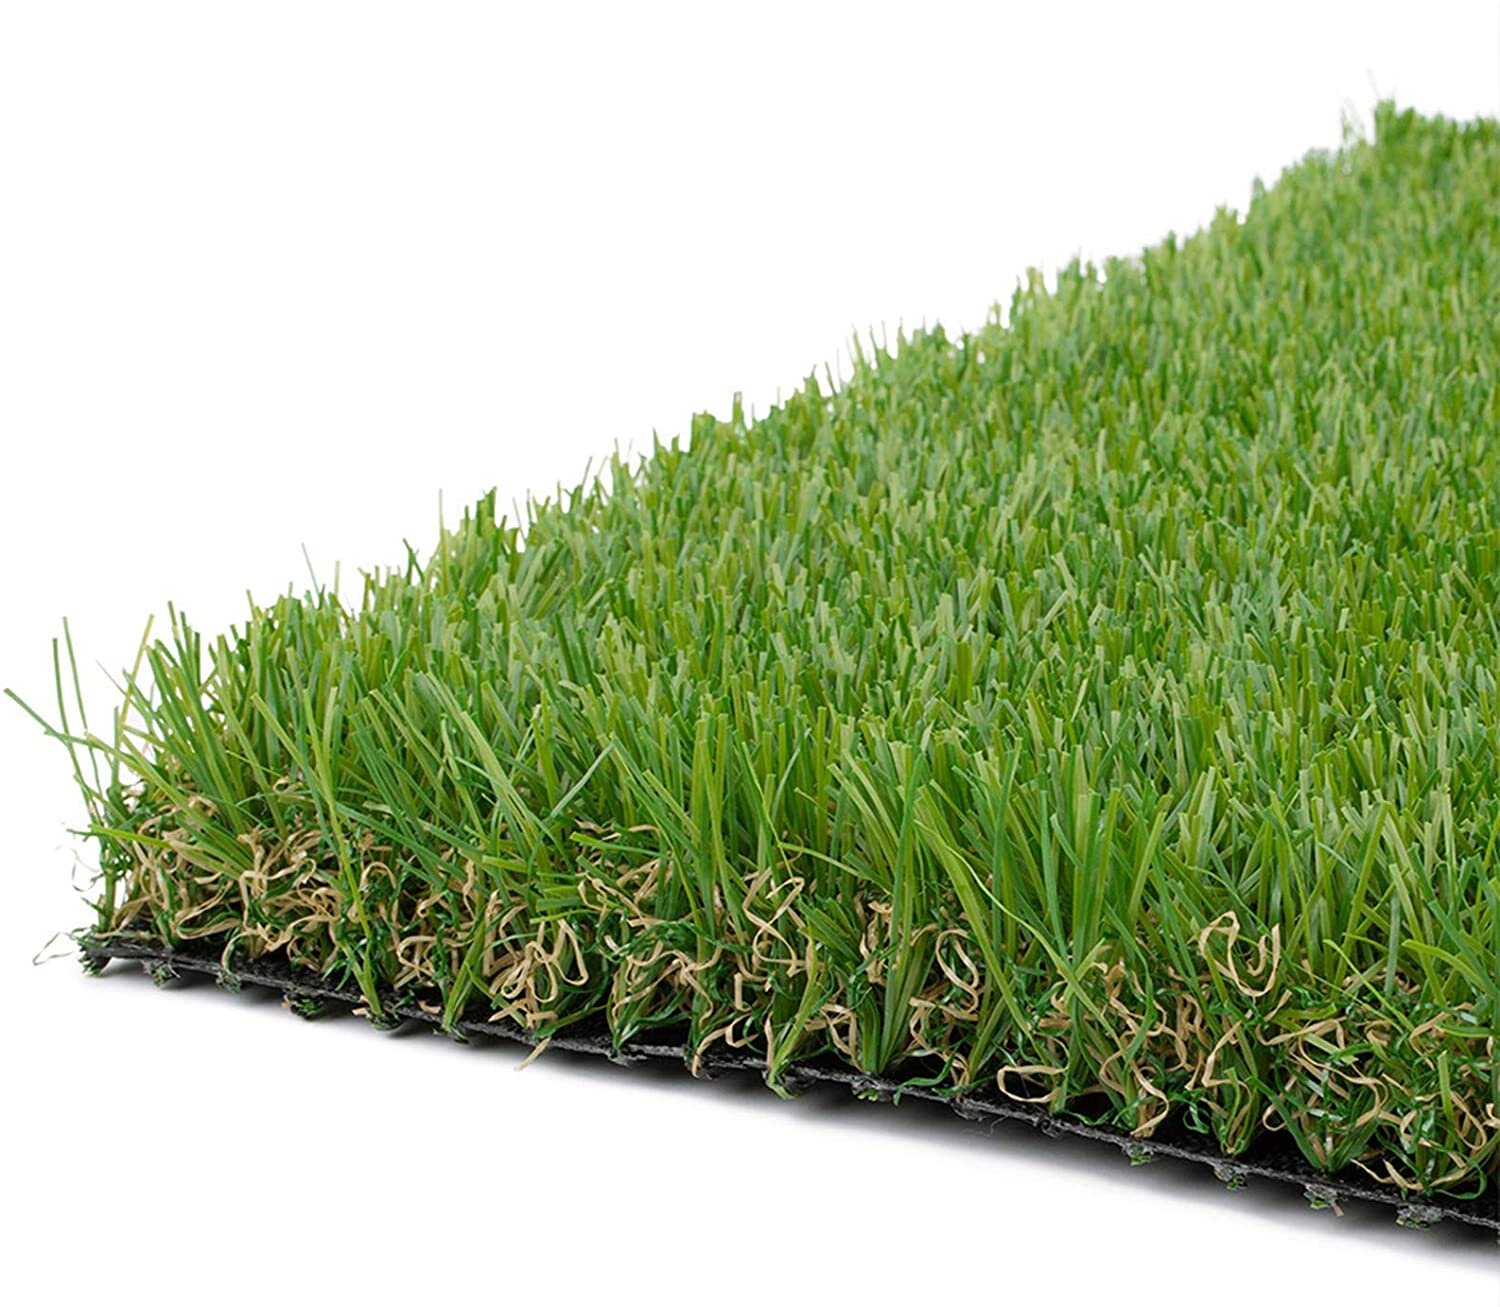 Artificial Grass Synthetic Mat Rug Pet Turf Lawn Carpet Landscape Indoor Outdoor 